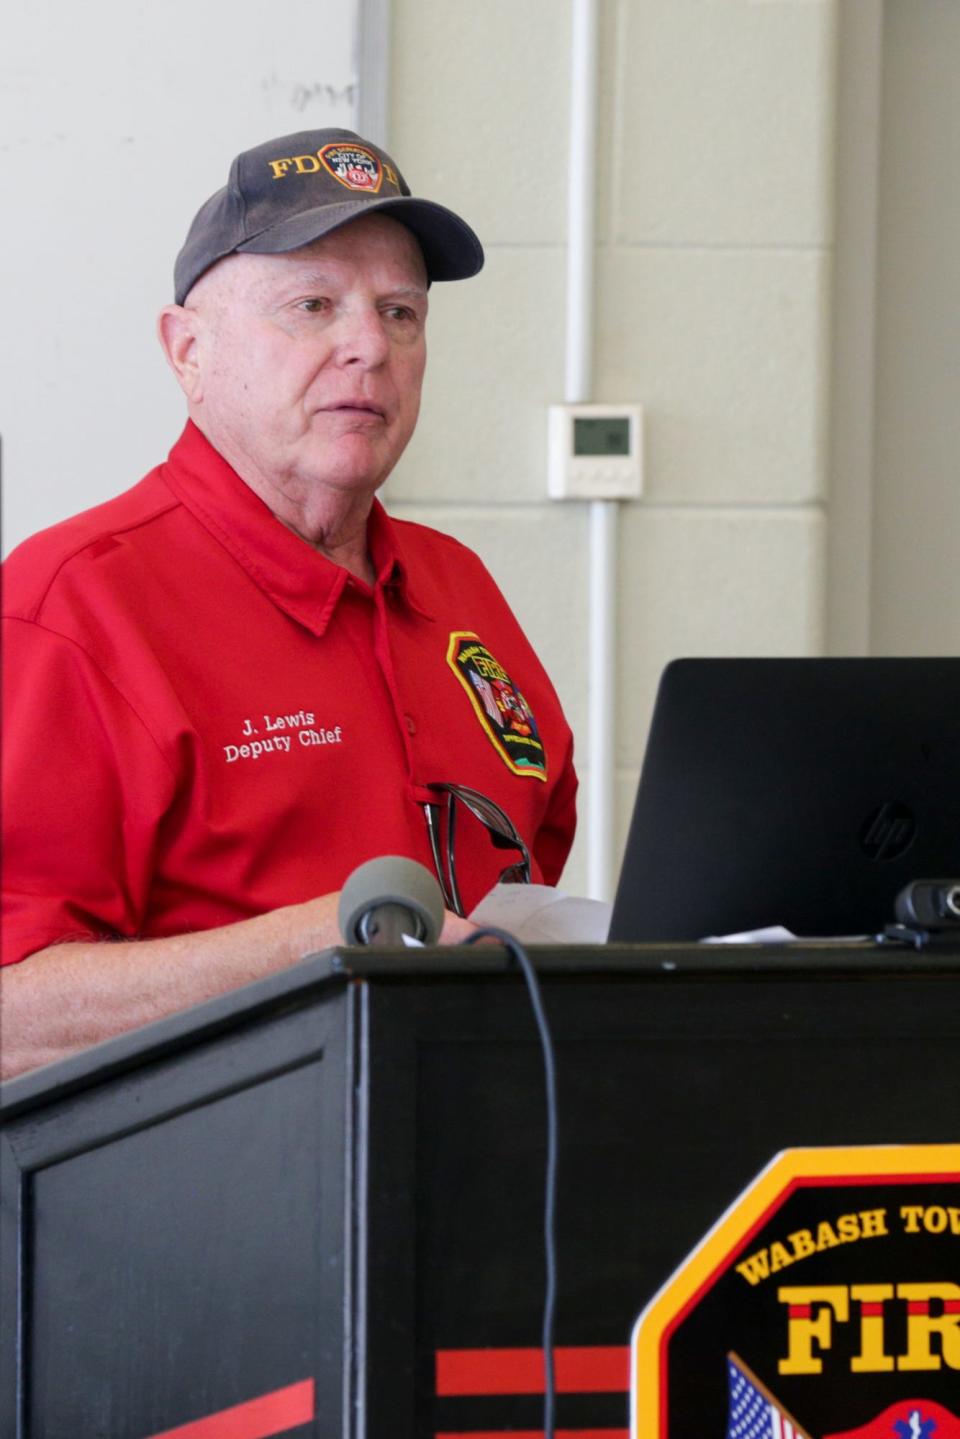 Deputy Chief Jim Lewis during a meeting of the Wabash Township board, Tuesday, June 15, 2021 in Wabash Township.